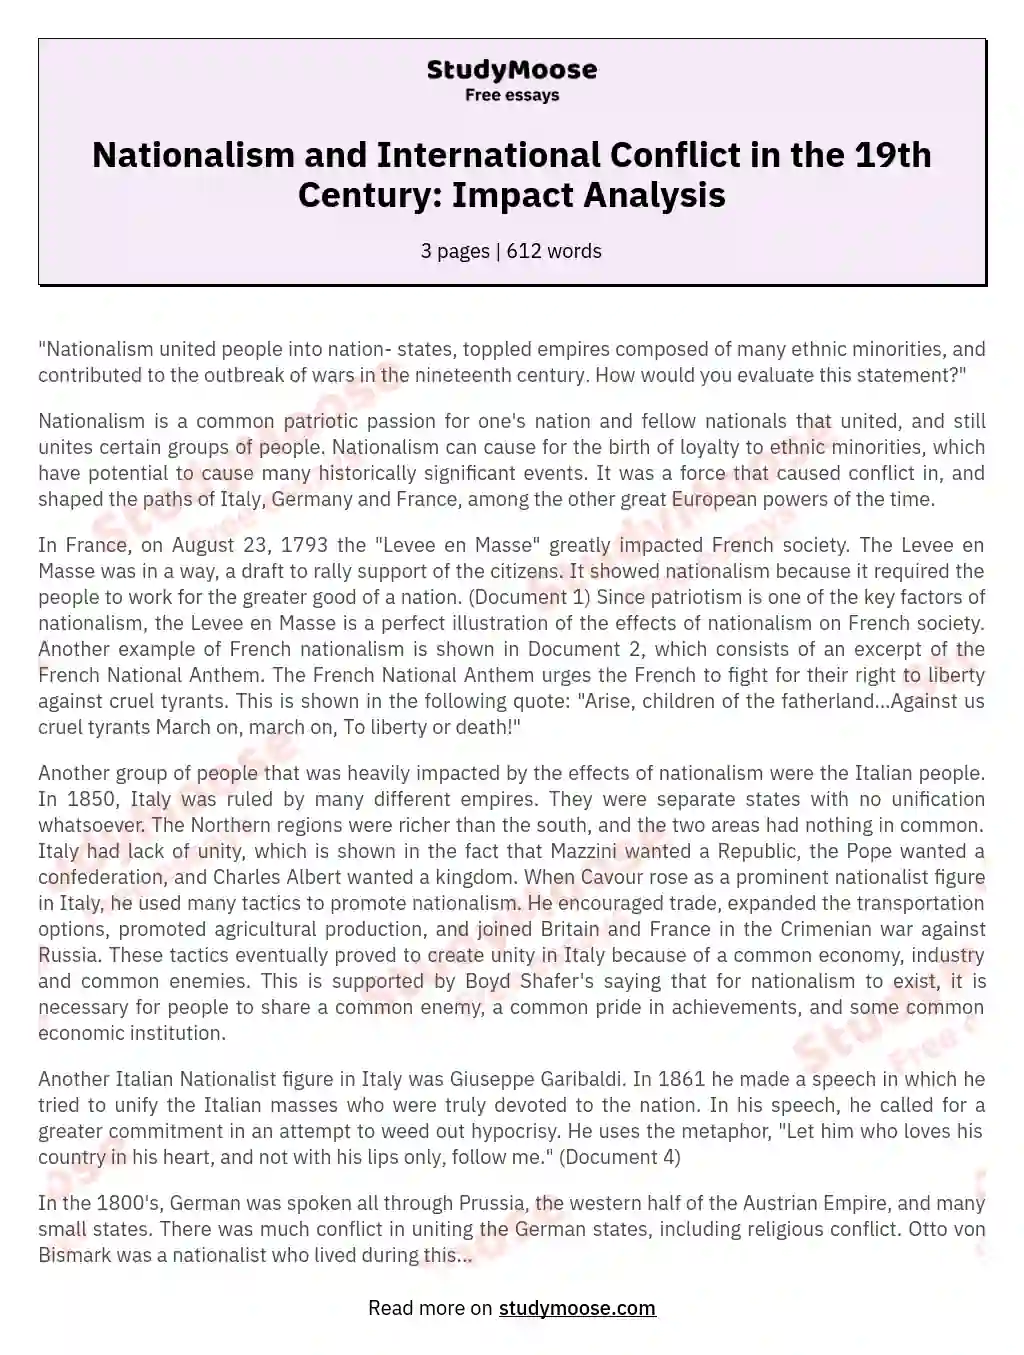 Nationalism and International Conflict in the 19th Century: Impact Analysis essay